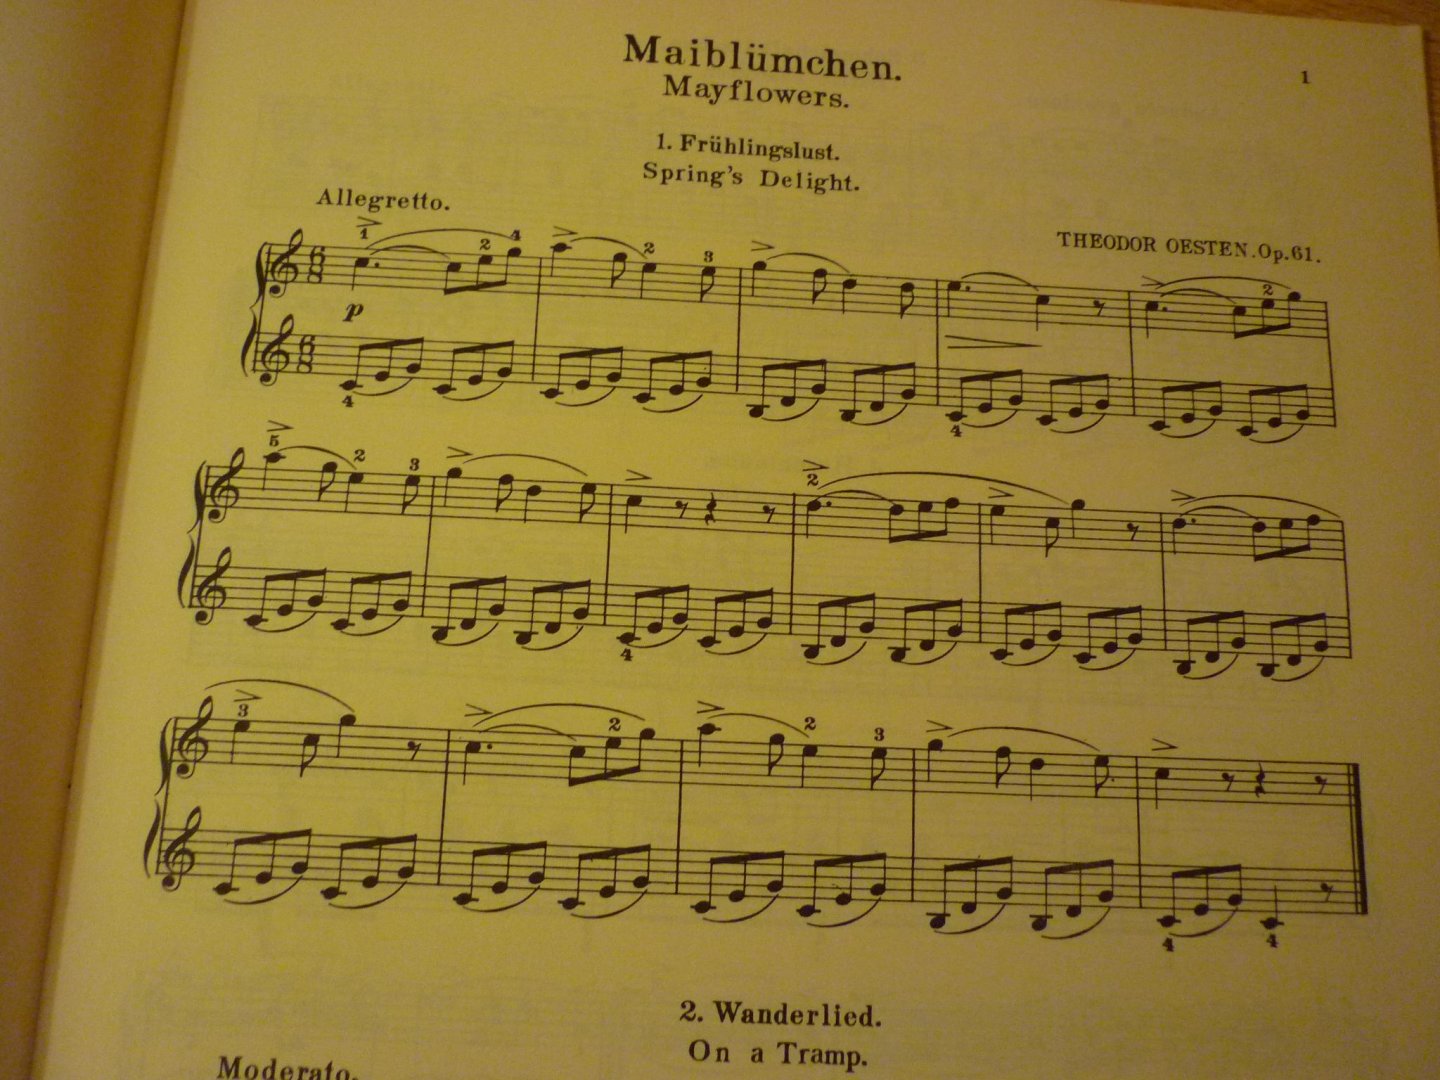 Oesten; Theodor - Mayflowers; (Fleurs de Mai. Maiblumchen) 25 Easy studies for Pianoforte by Theodor Oesten, Op. 61. Piano Solo (edited and fingered by Louis Oesterle)